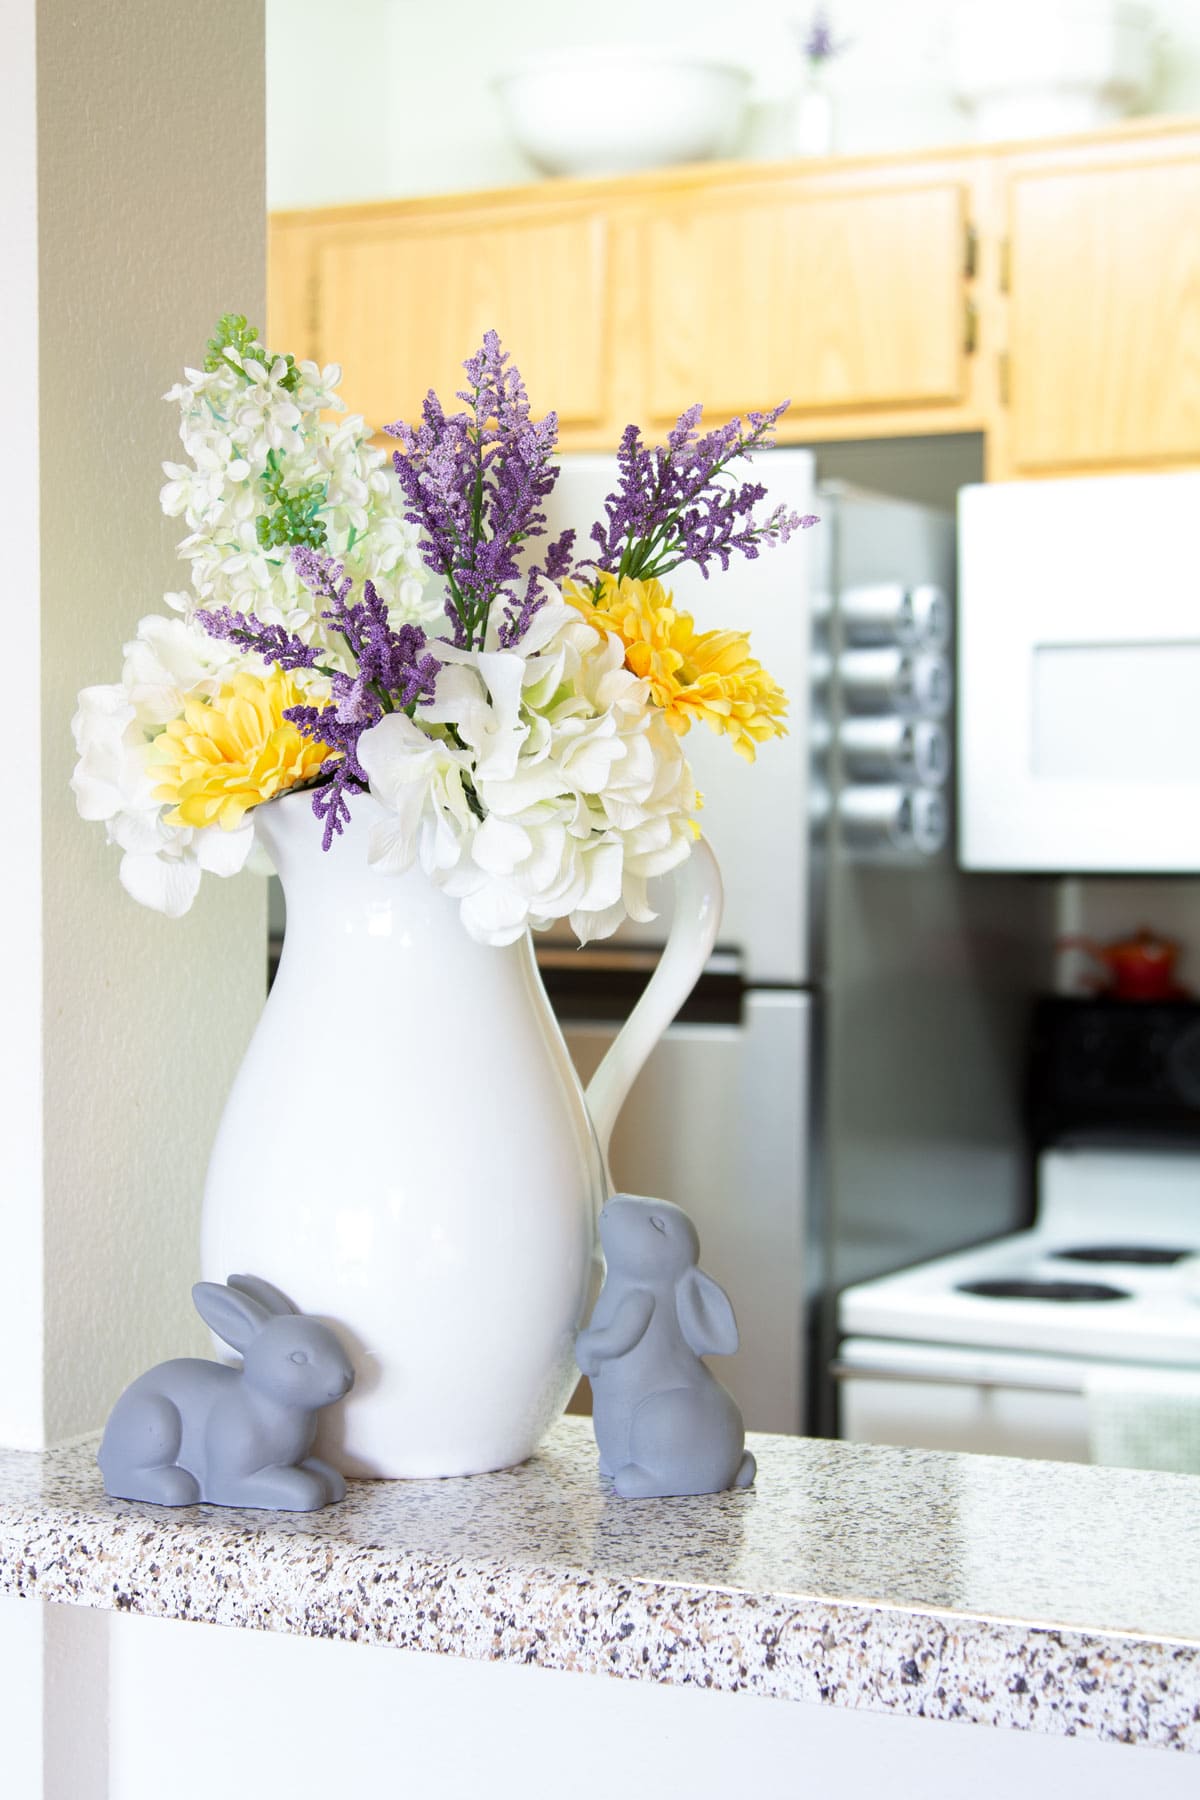 white pitcher with spring flowers and gray bunnies in kitchen